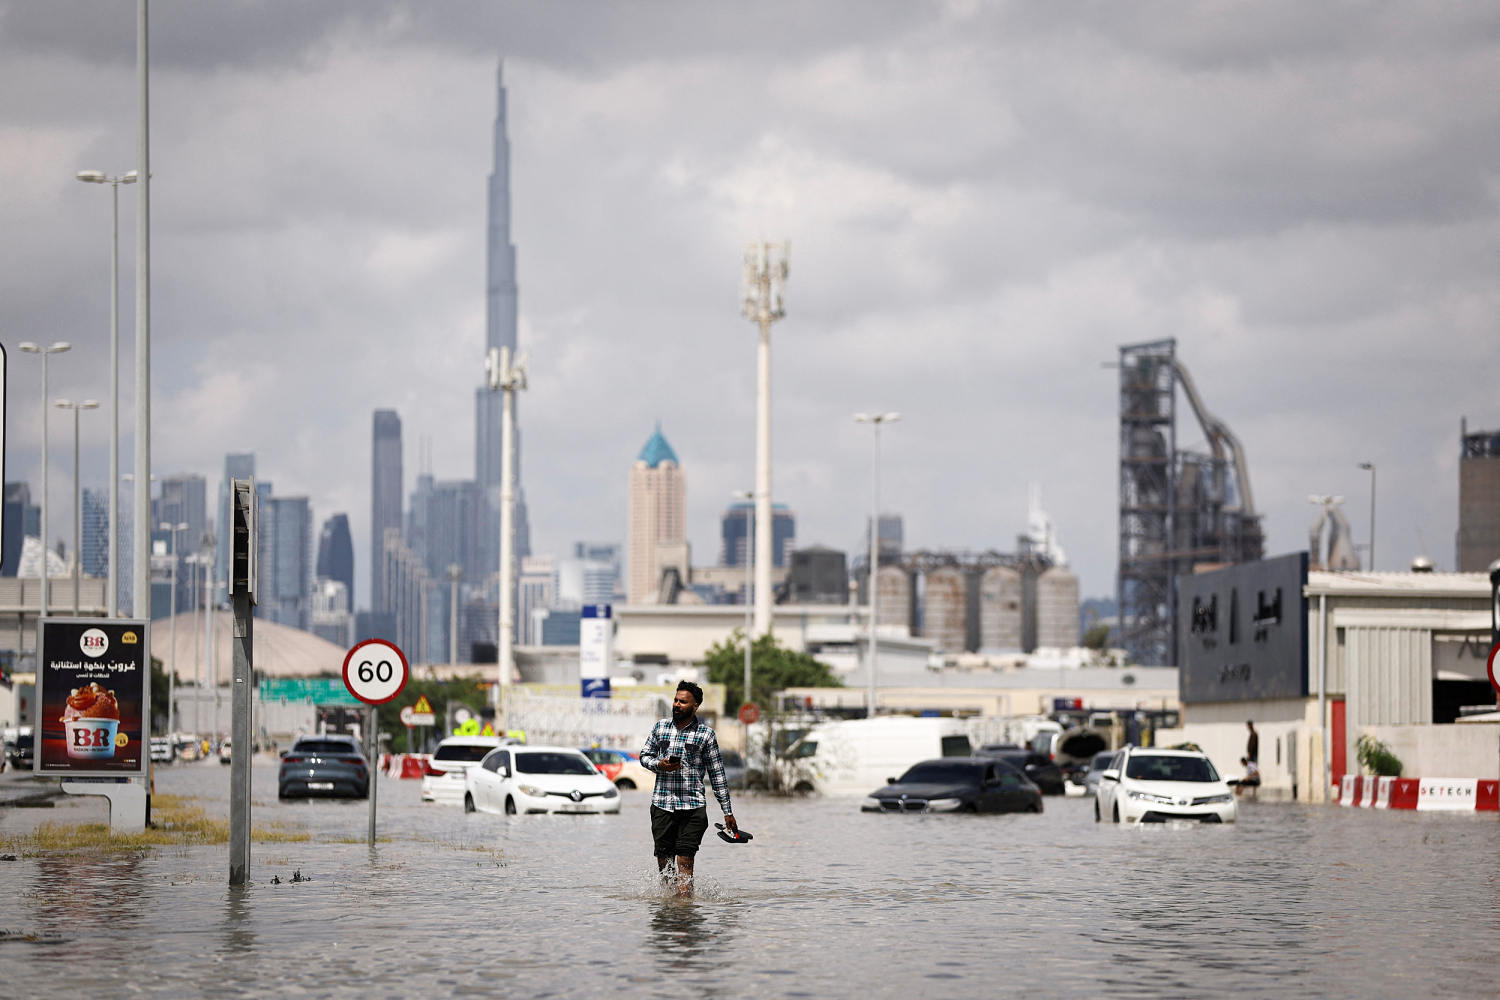 UAE government says cloud seeding did not take place before Dubai floods